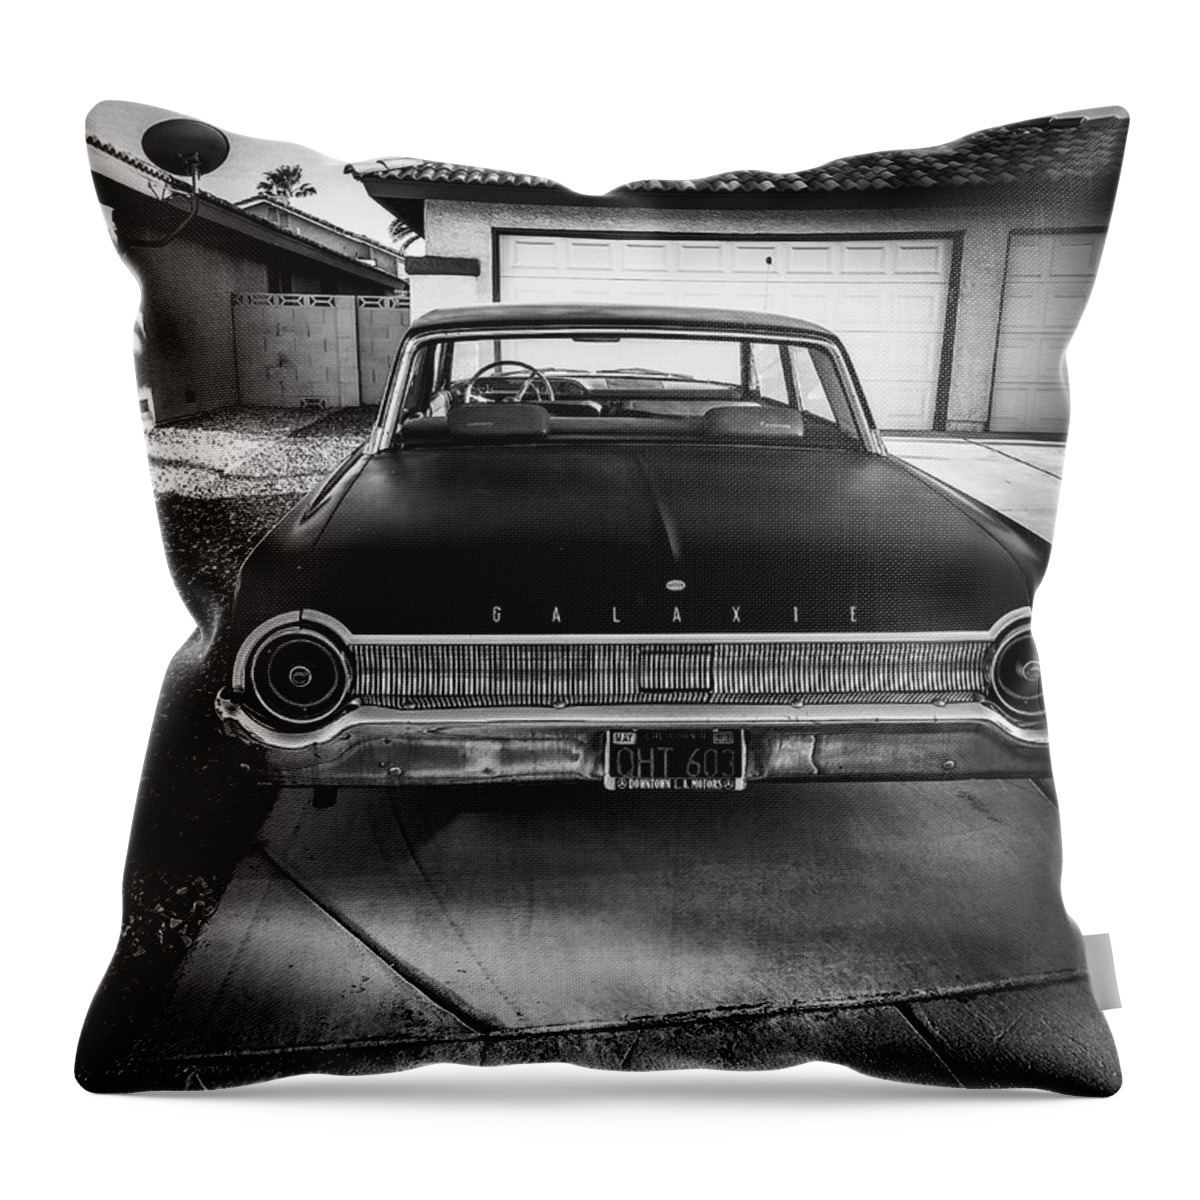  Throw Pillow featuring the photograph Galaxie by Rodney Lee Williams